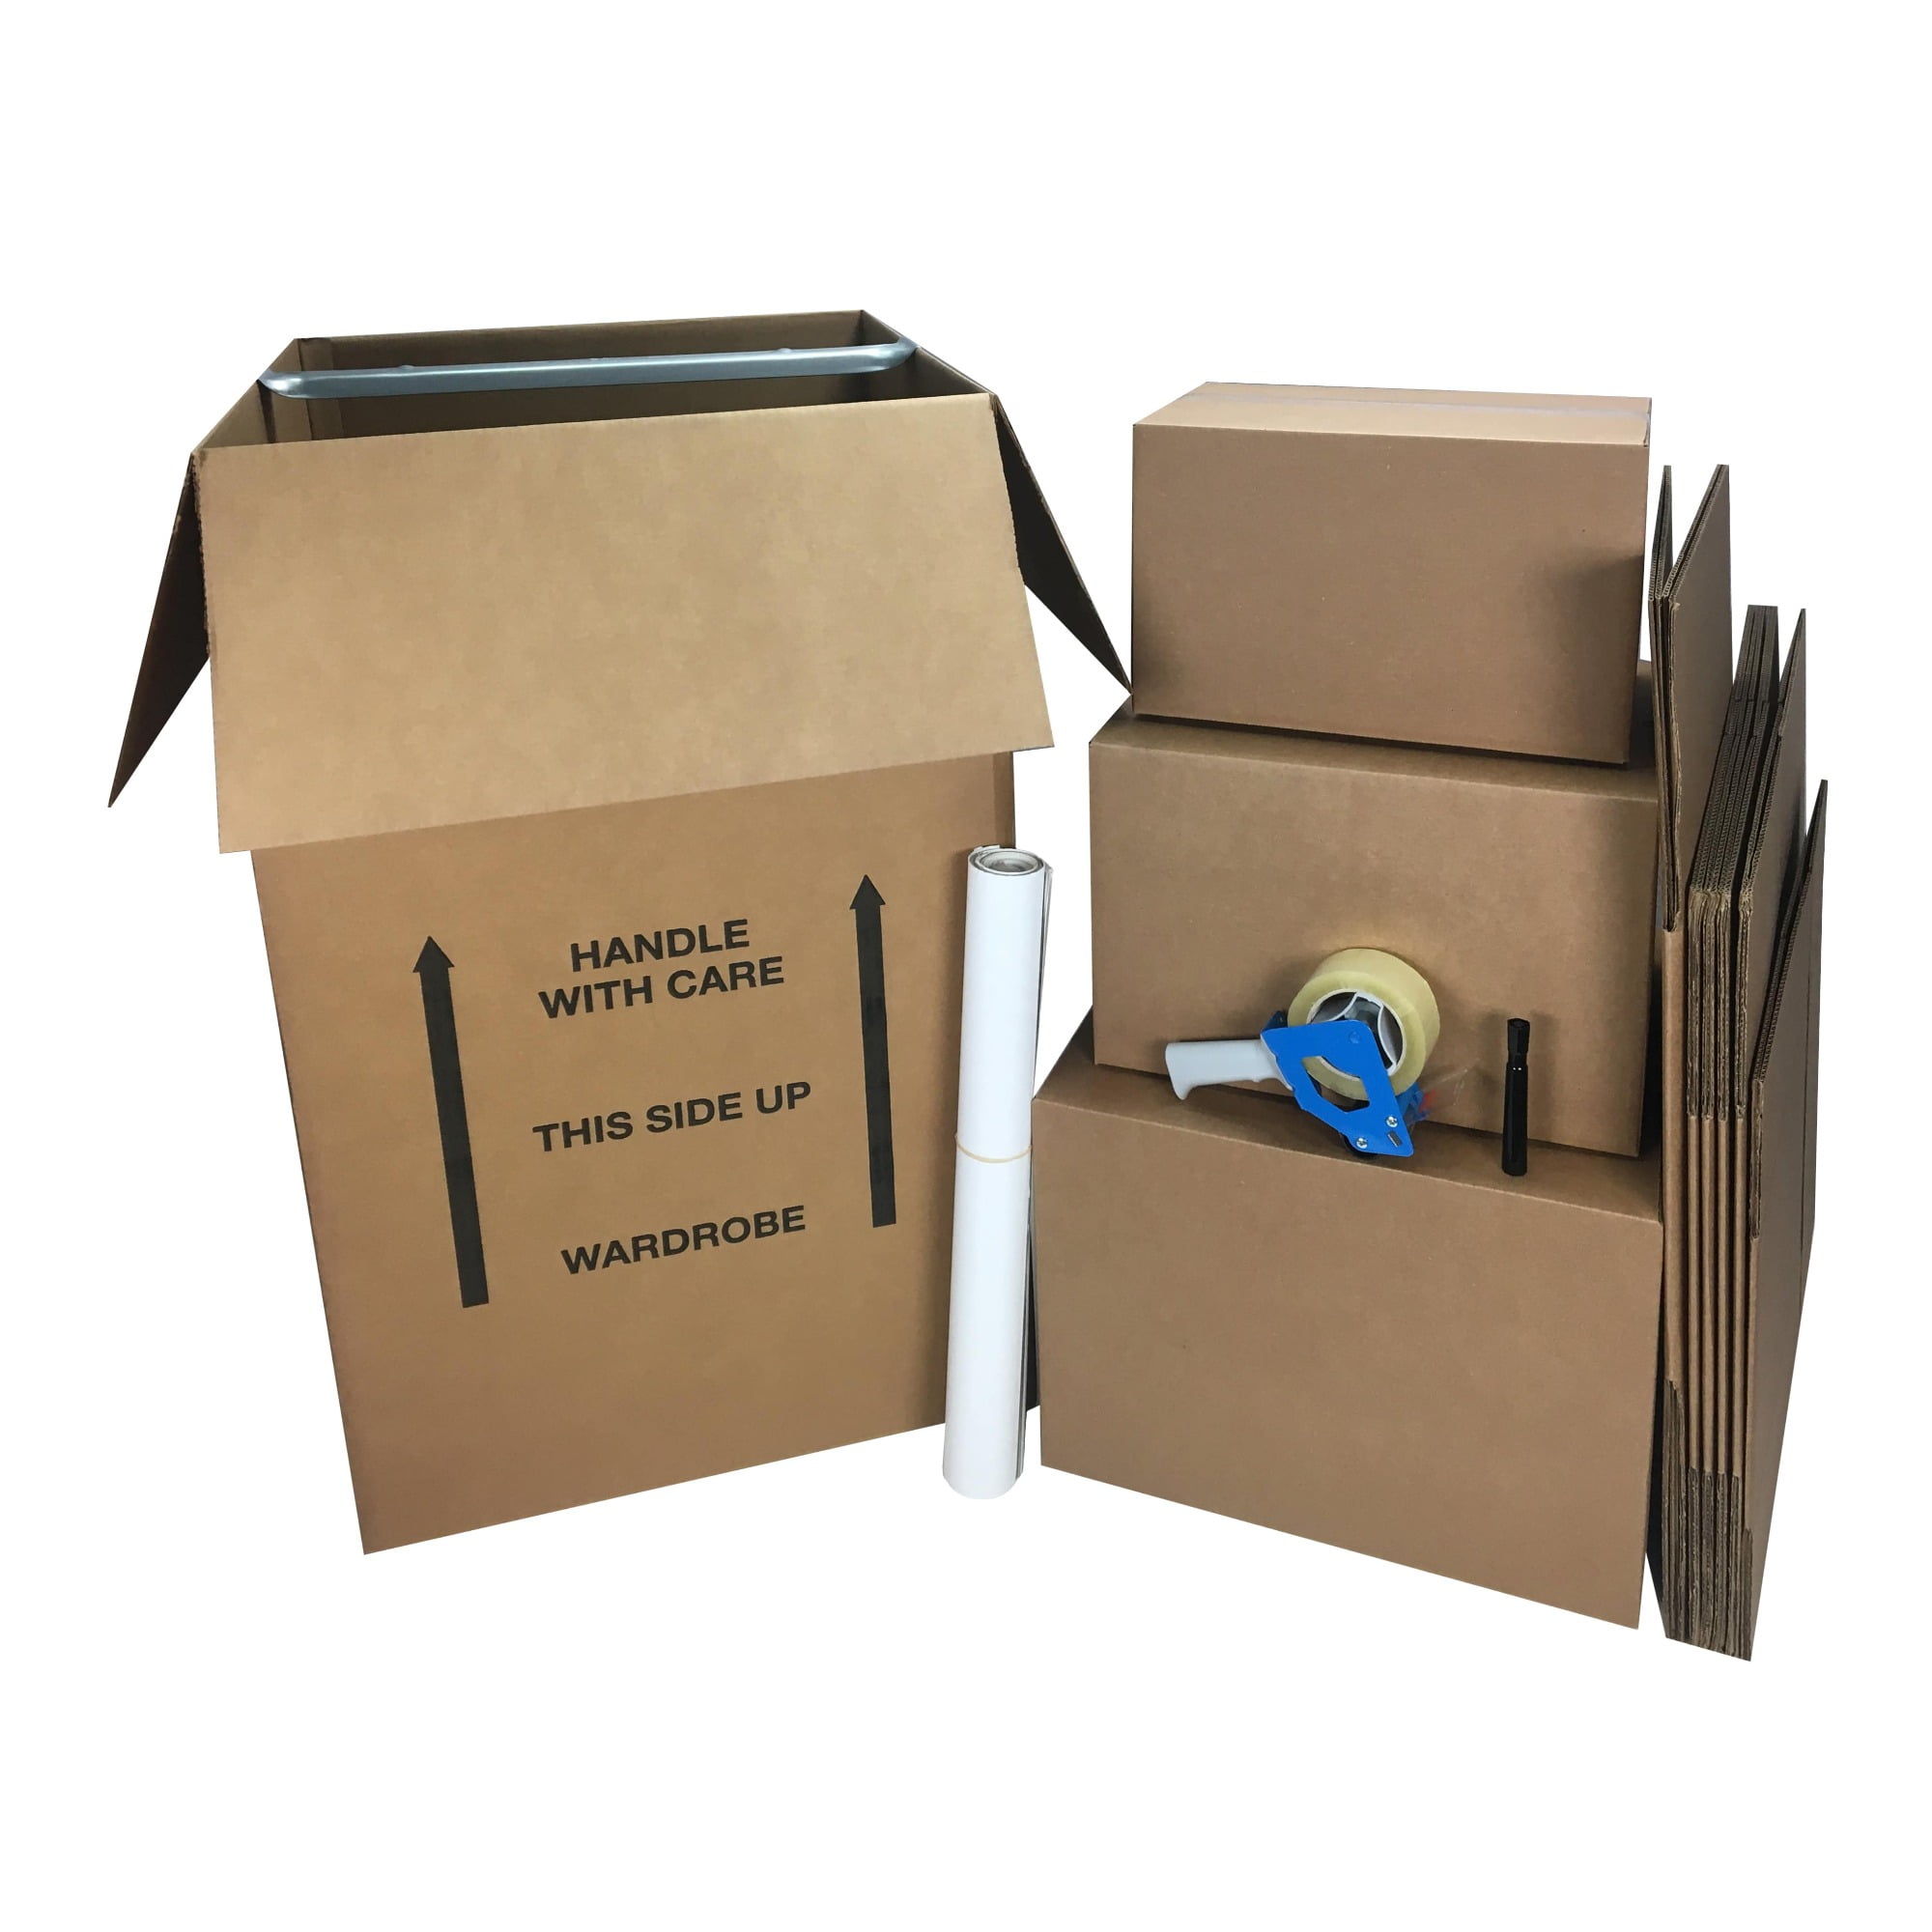 Moving supplies: 1-2 Bedroom Kit®